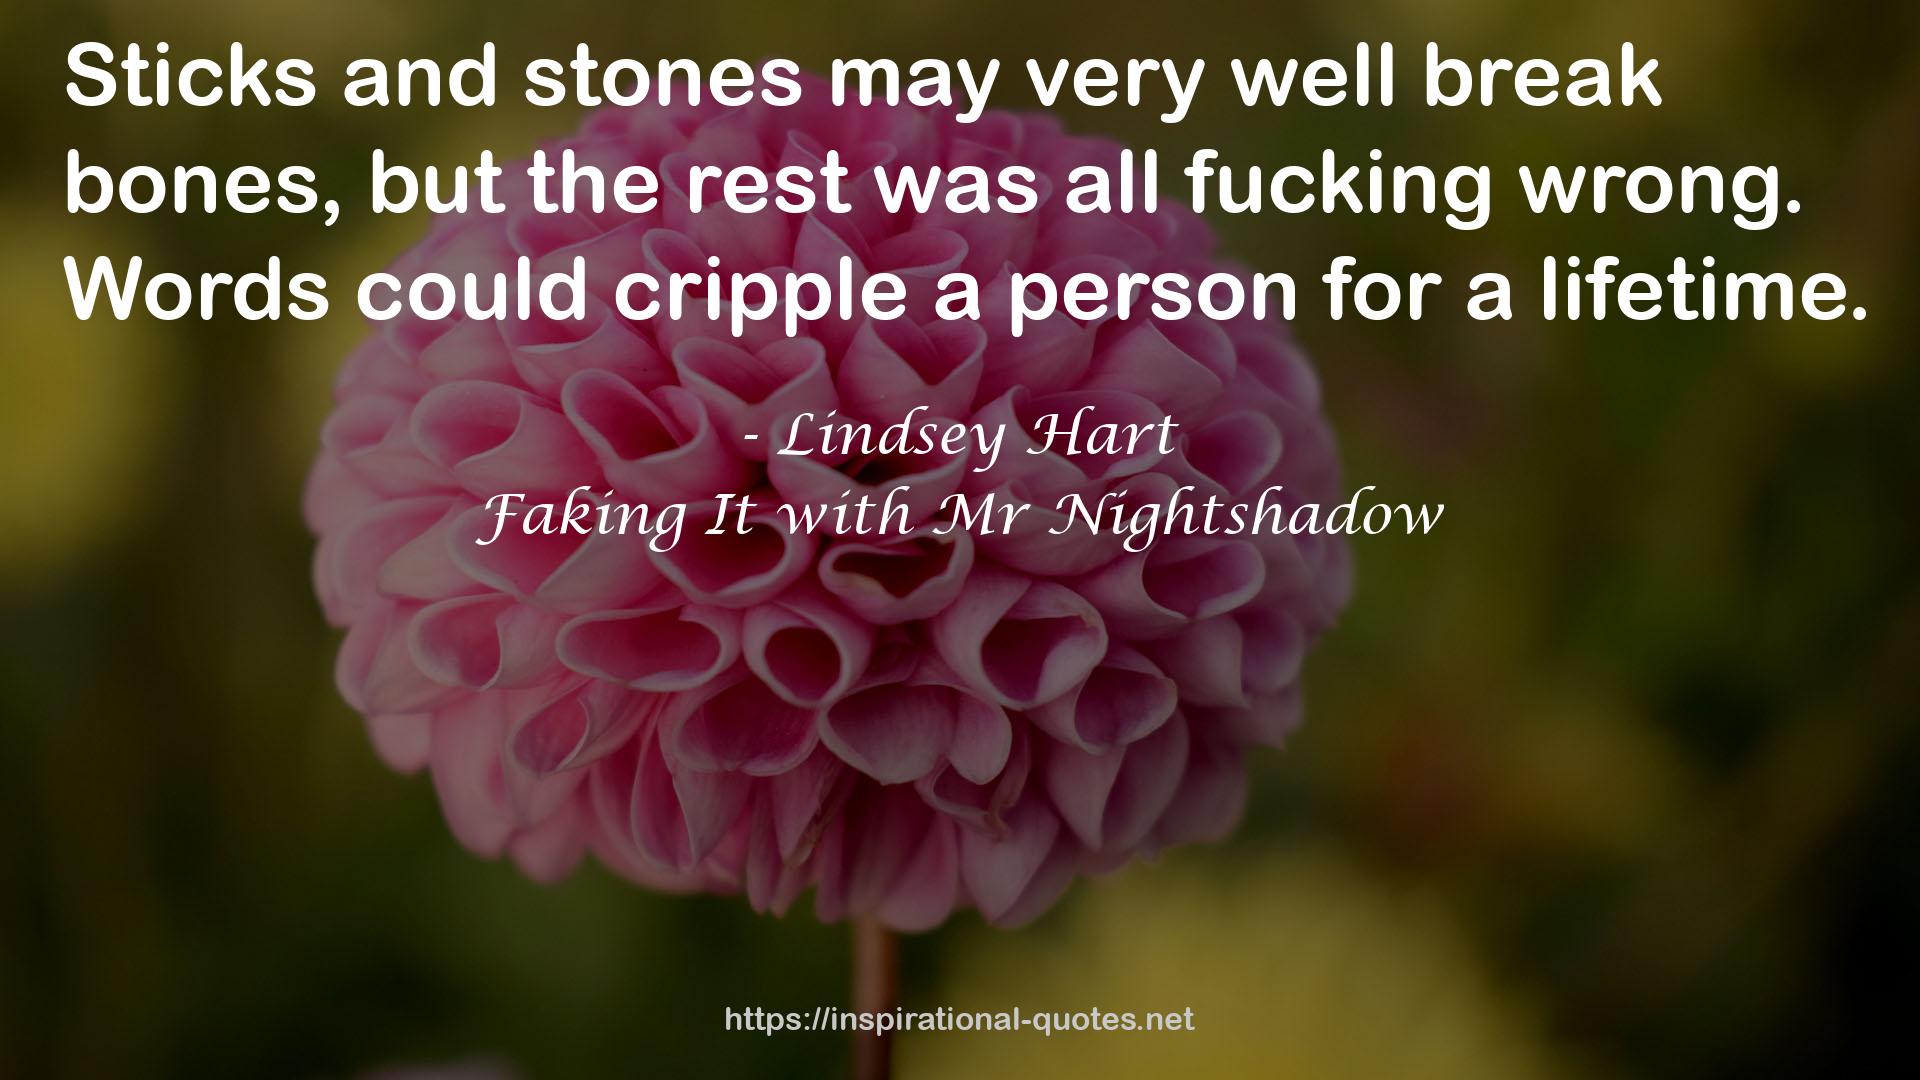 Faking It with Mr Nightshadow QUOTES